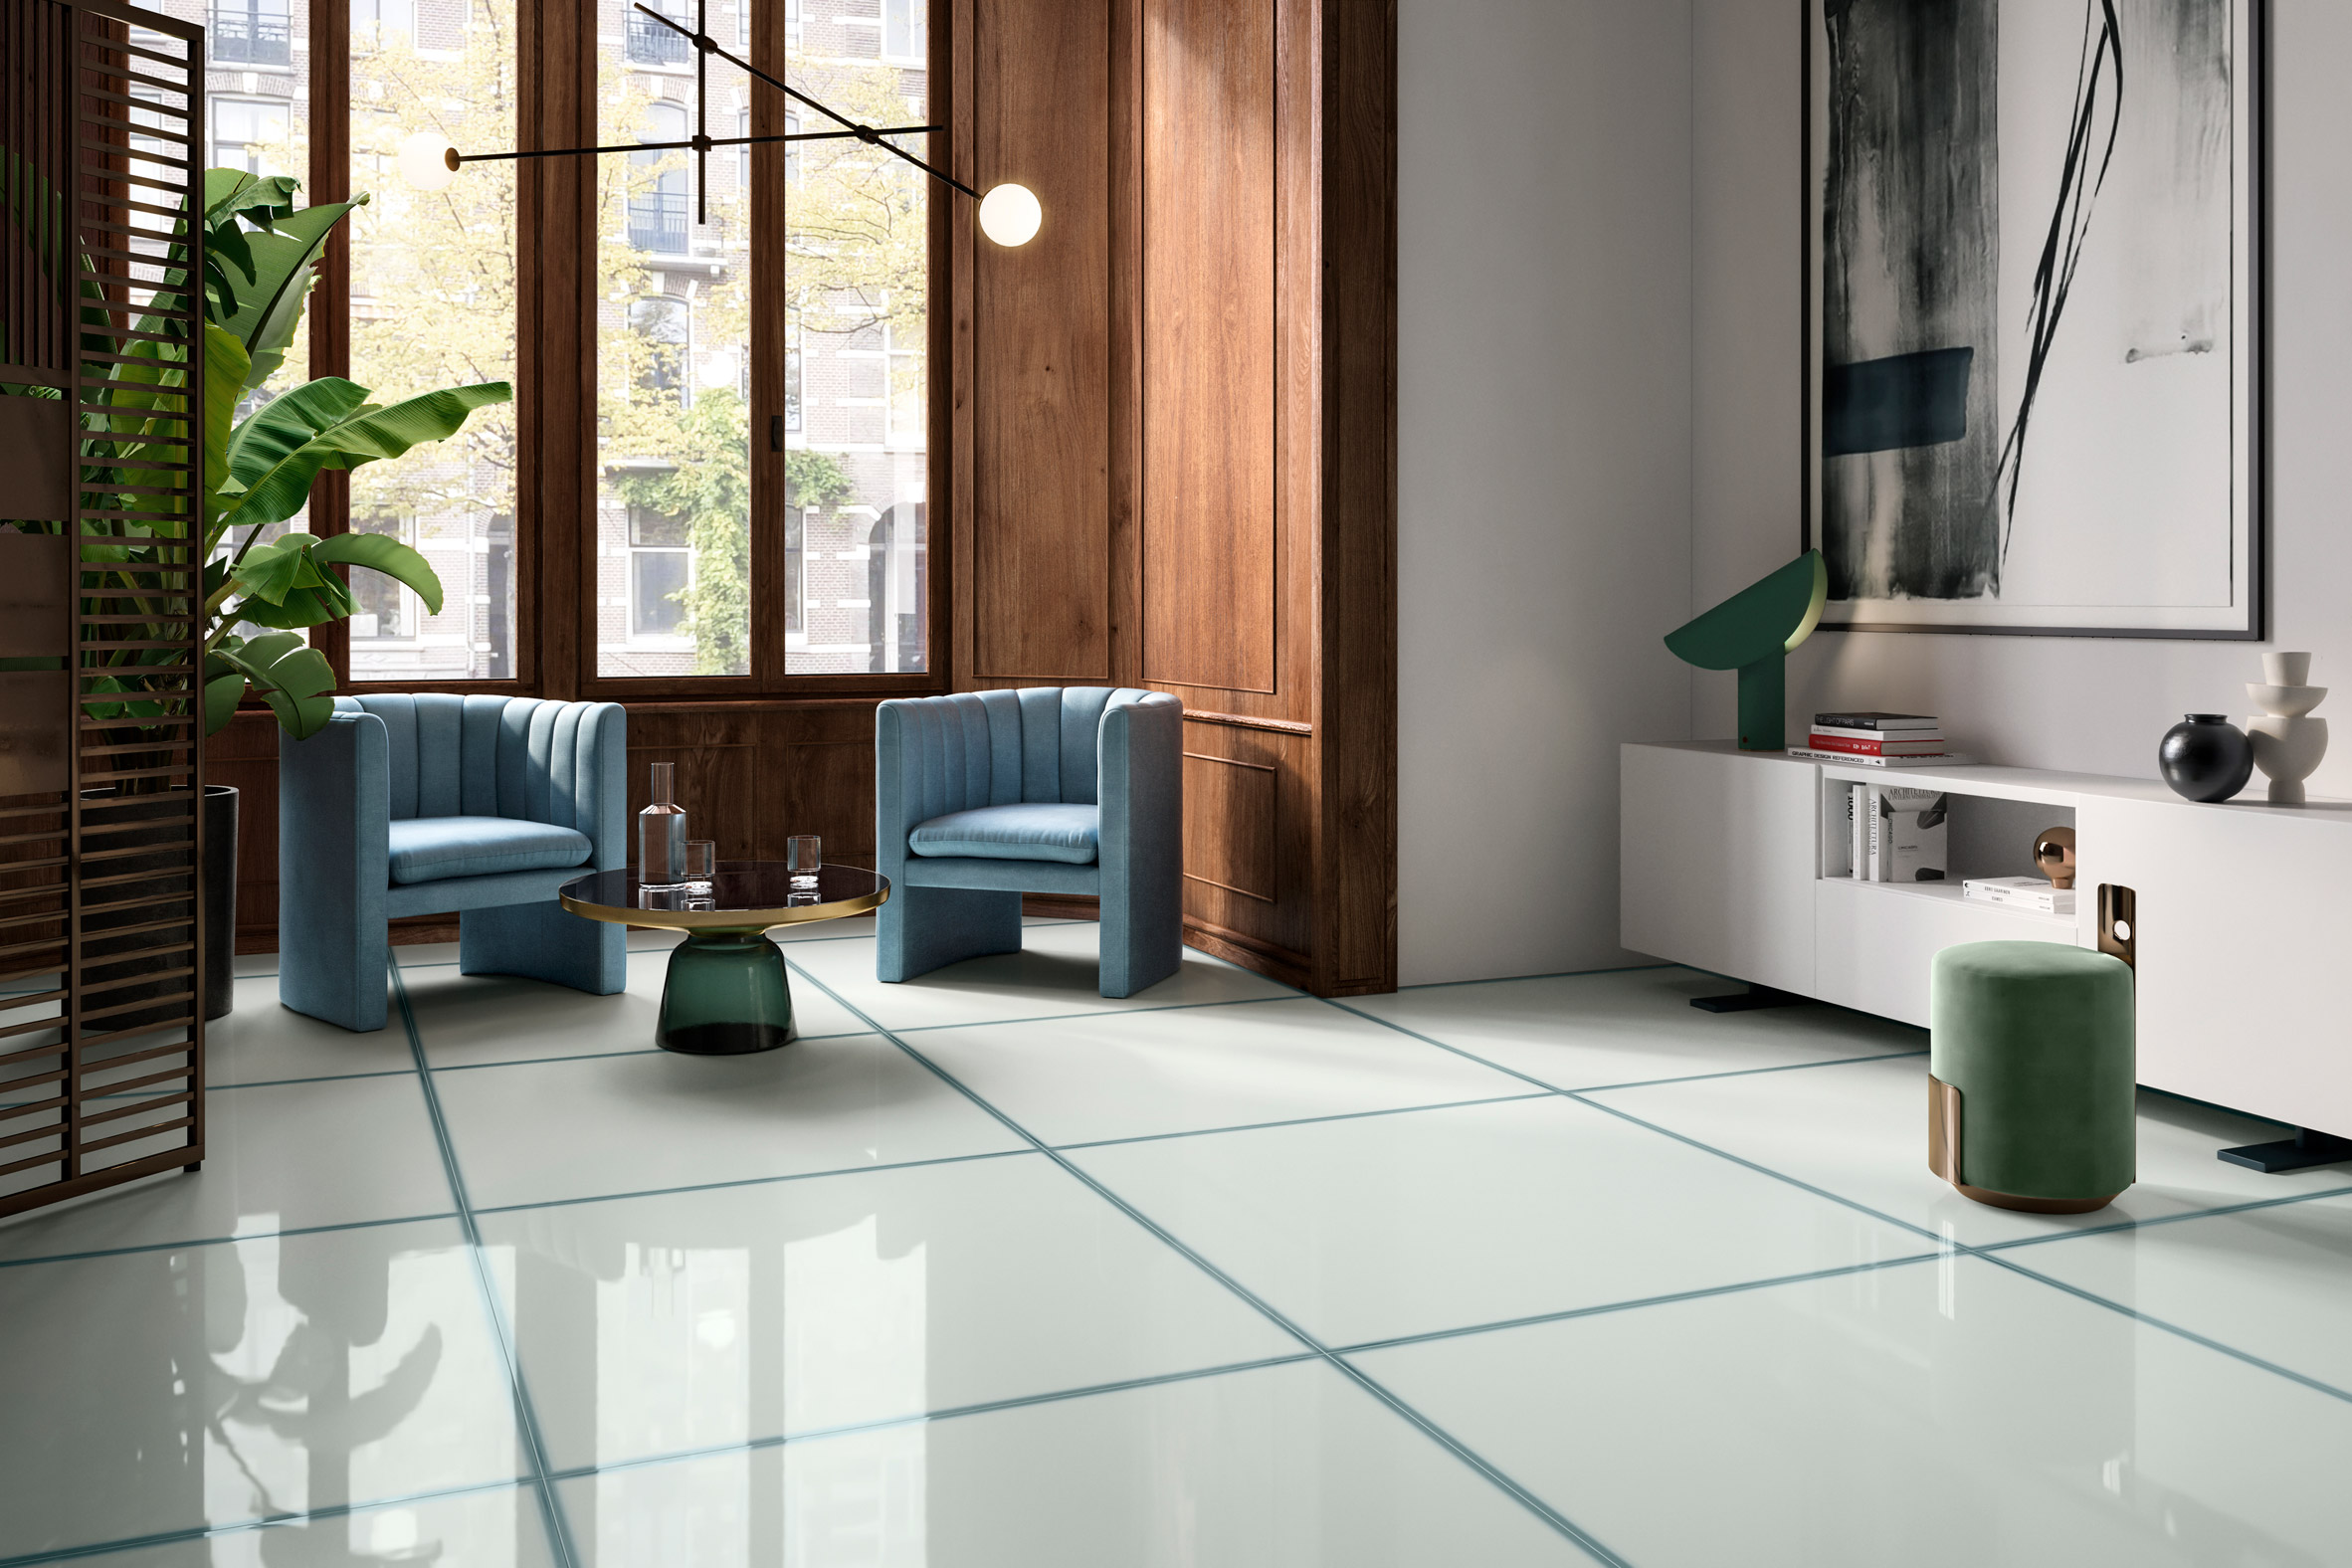 Ceramiche Refin's collection of glass-effect tiles